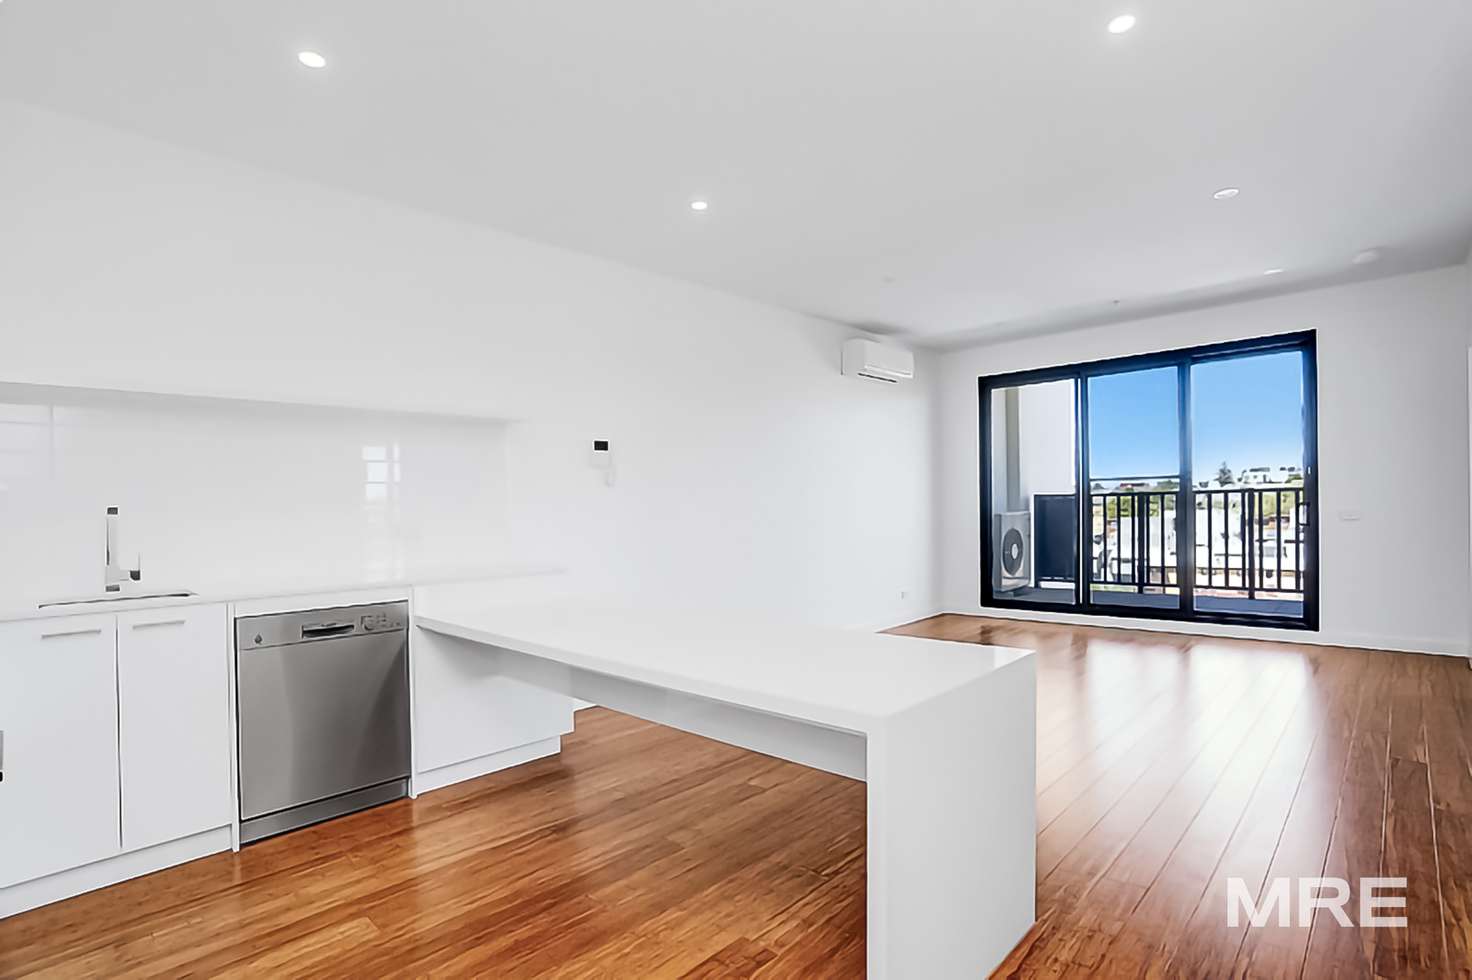 Main view of Homely apartment listing, 614/8 Olive York Way, Brunswick West VIC 3055